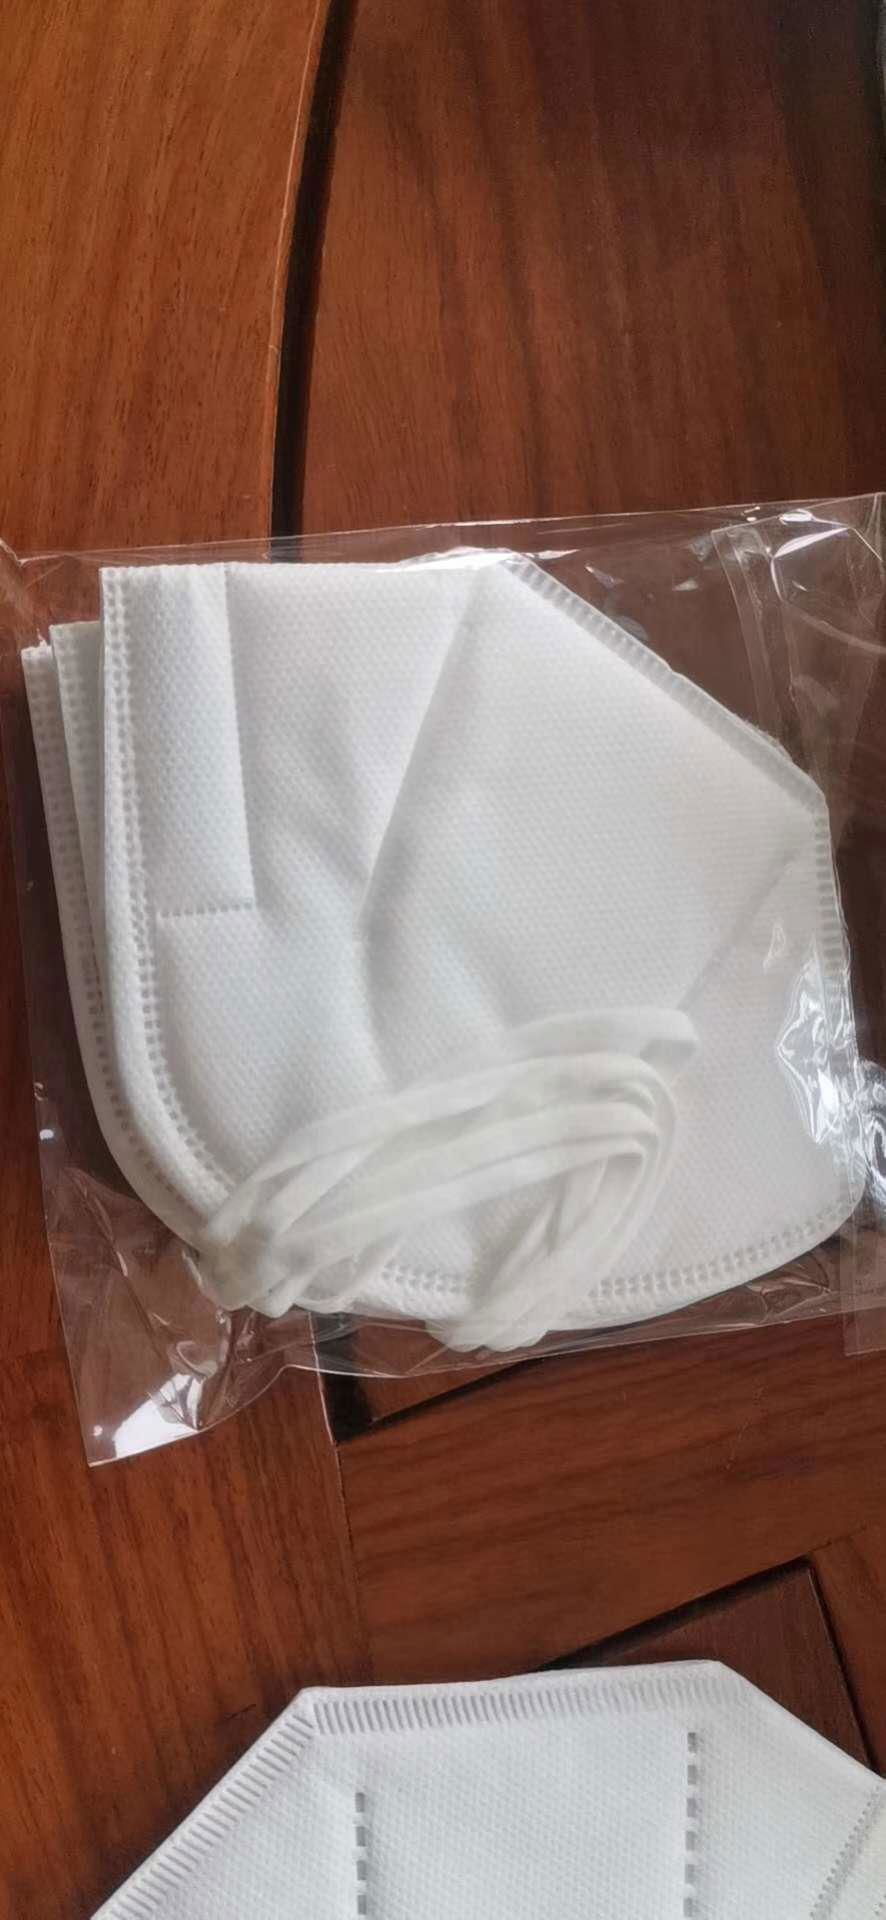 FBMSK-03 personal protective white 3 4 ply face mask kn95 2